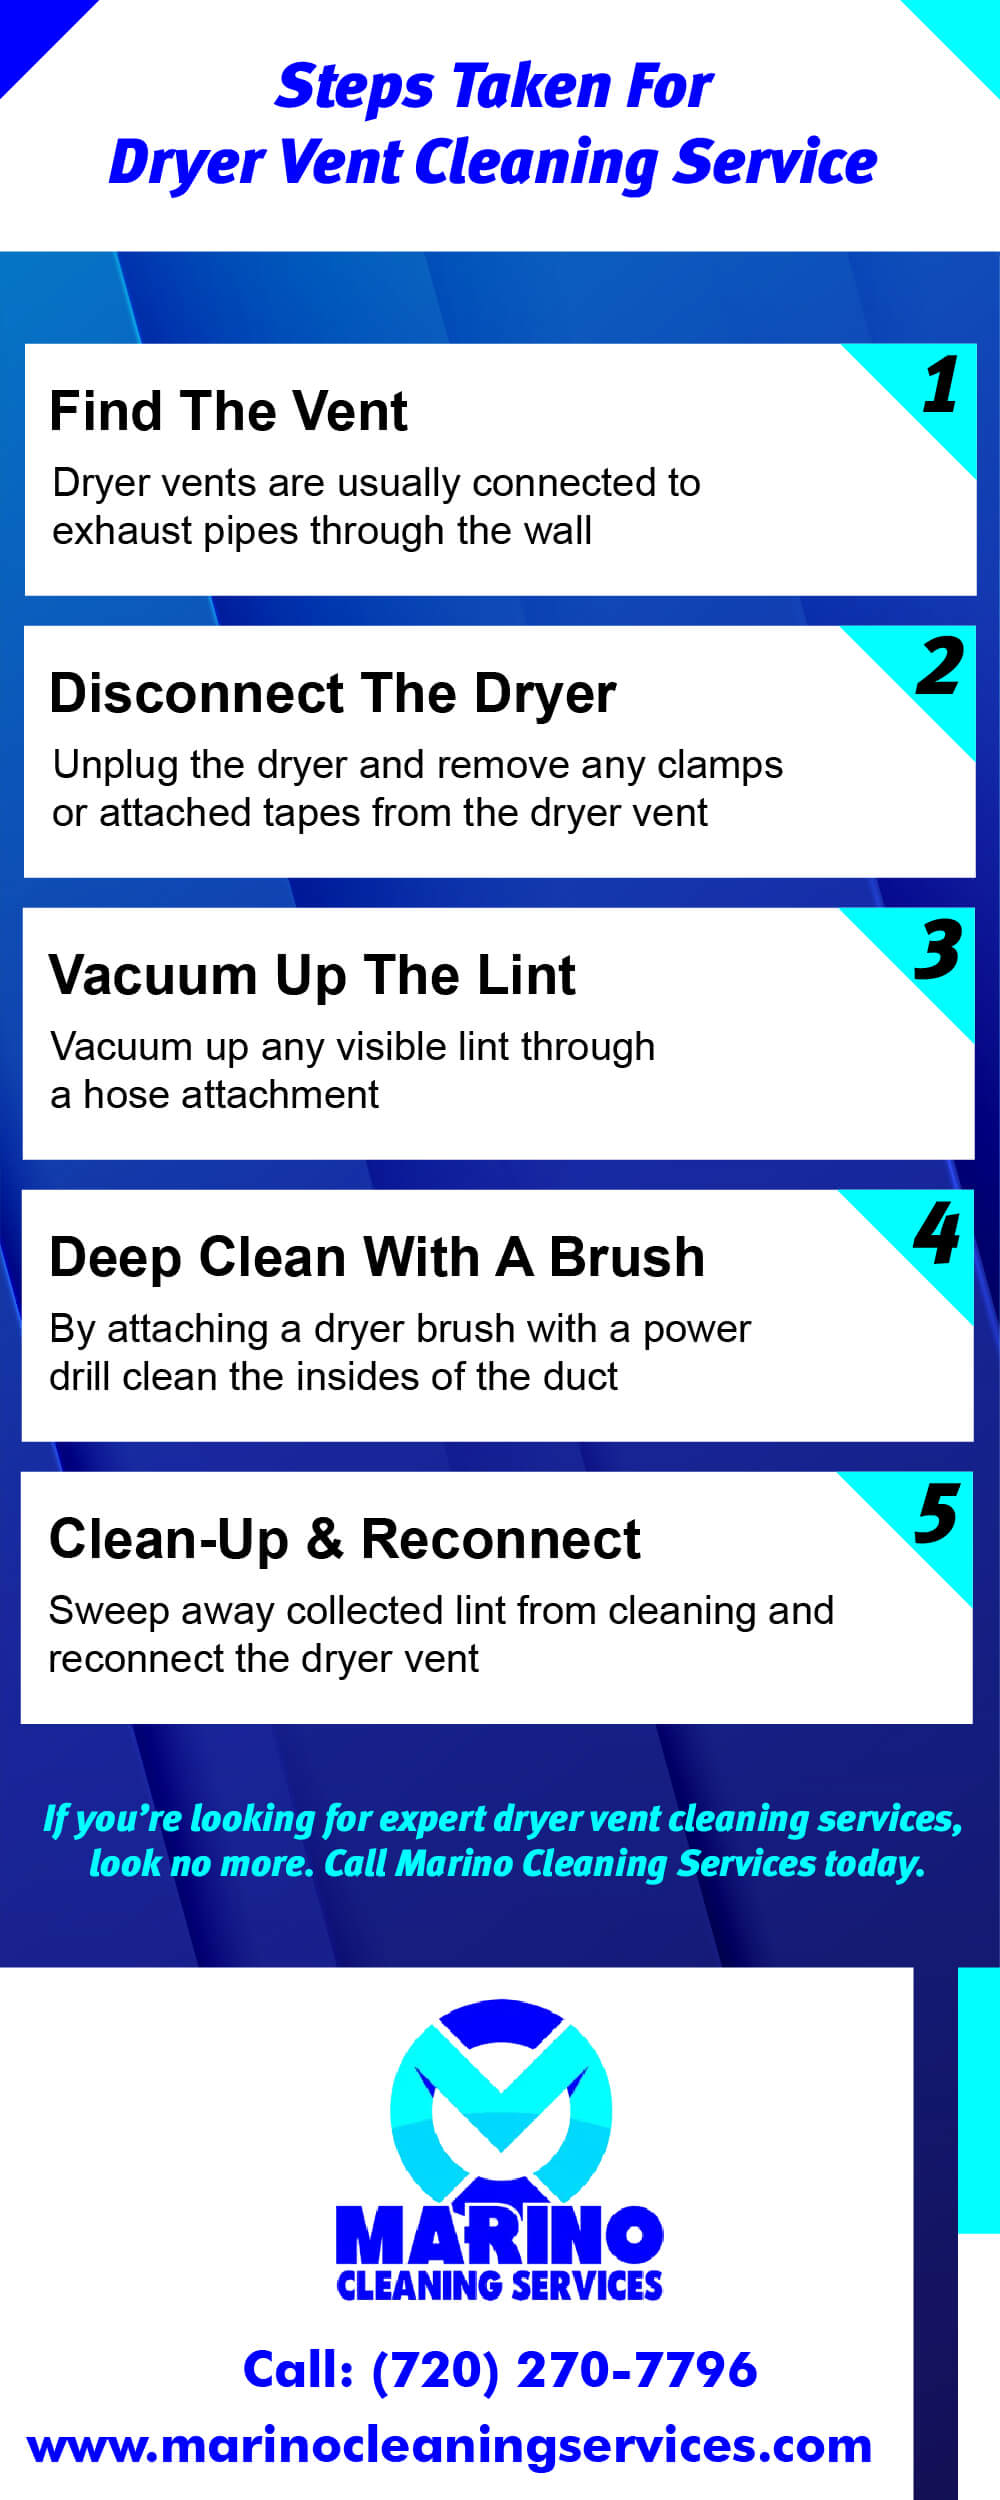 Steps Taken For Dryer Vent Cleaning Service [Infographic]